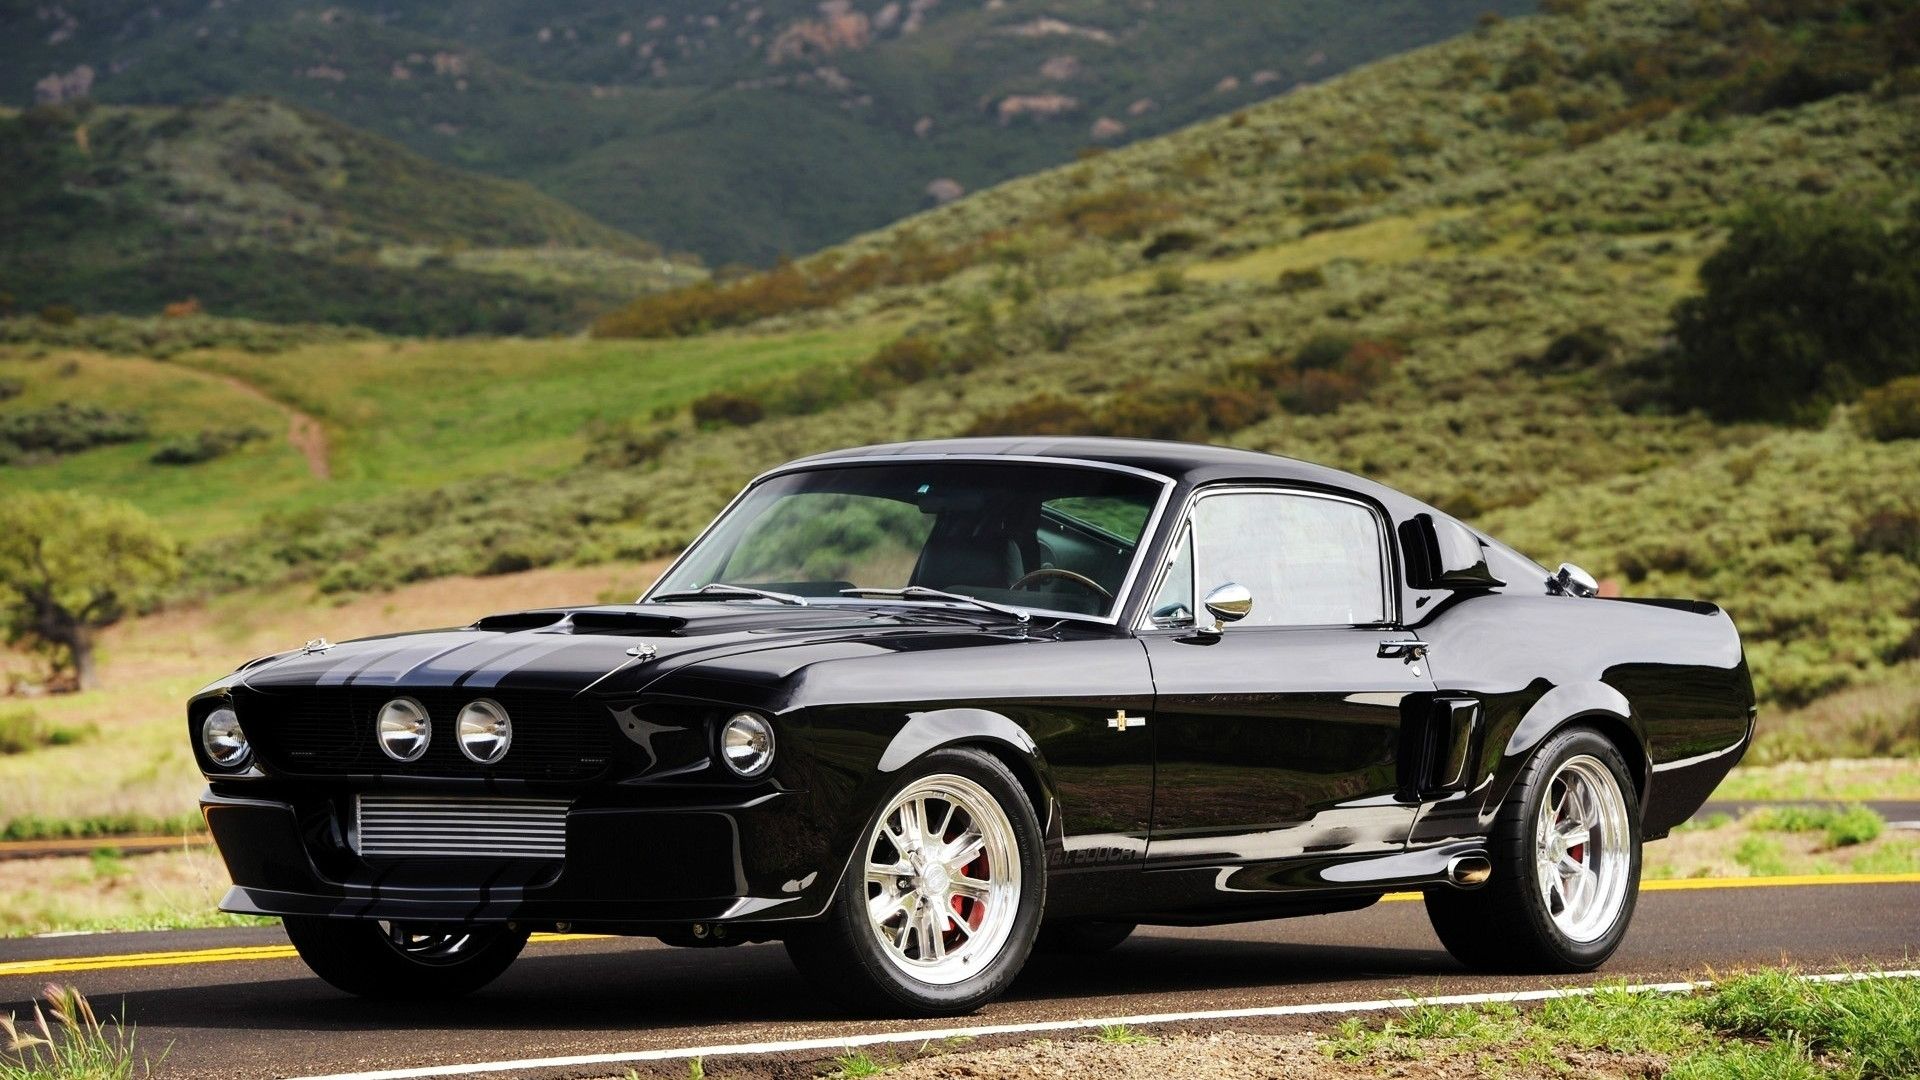 47+] Classic Ford Mustang Wallpapers